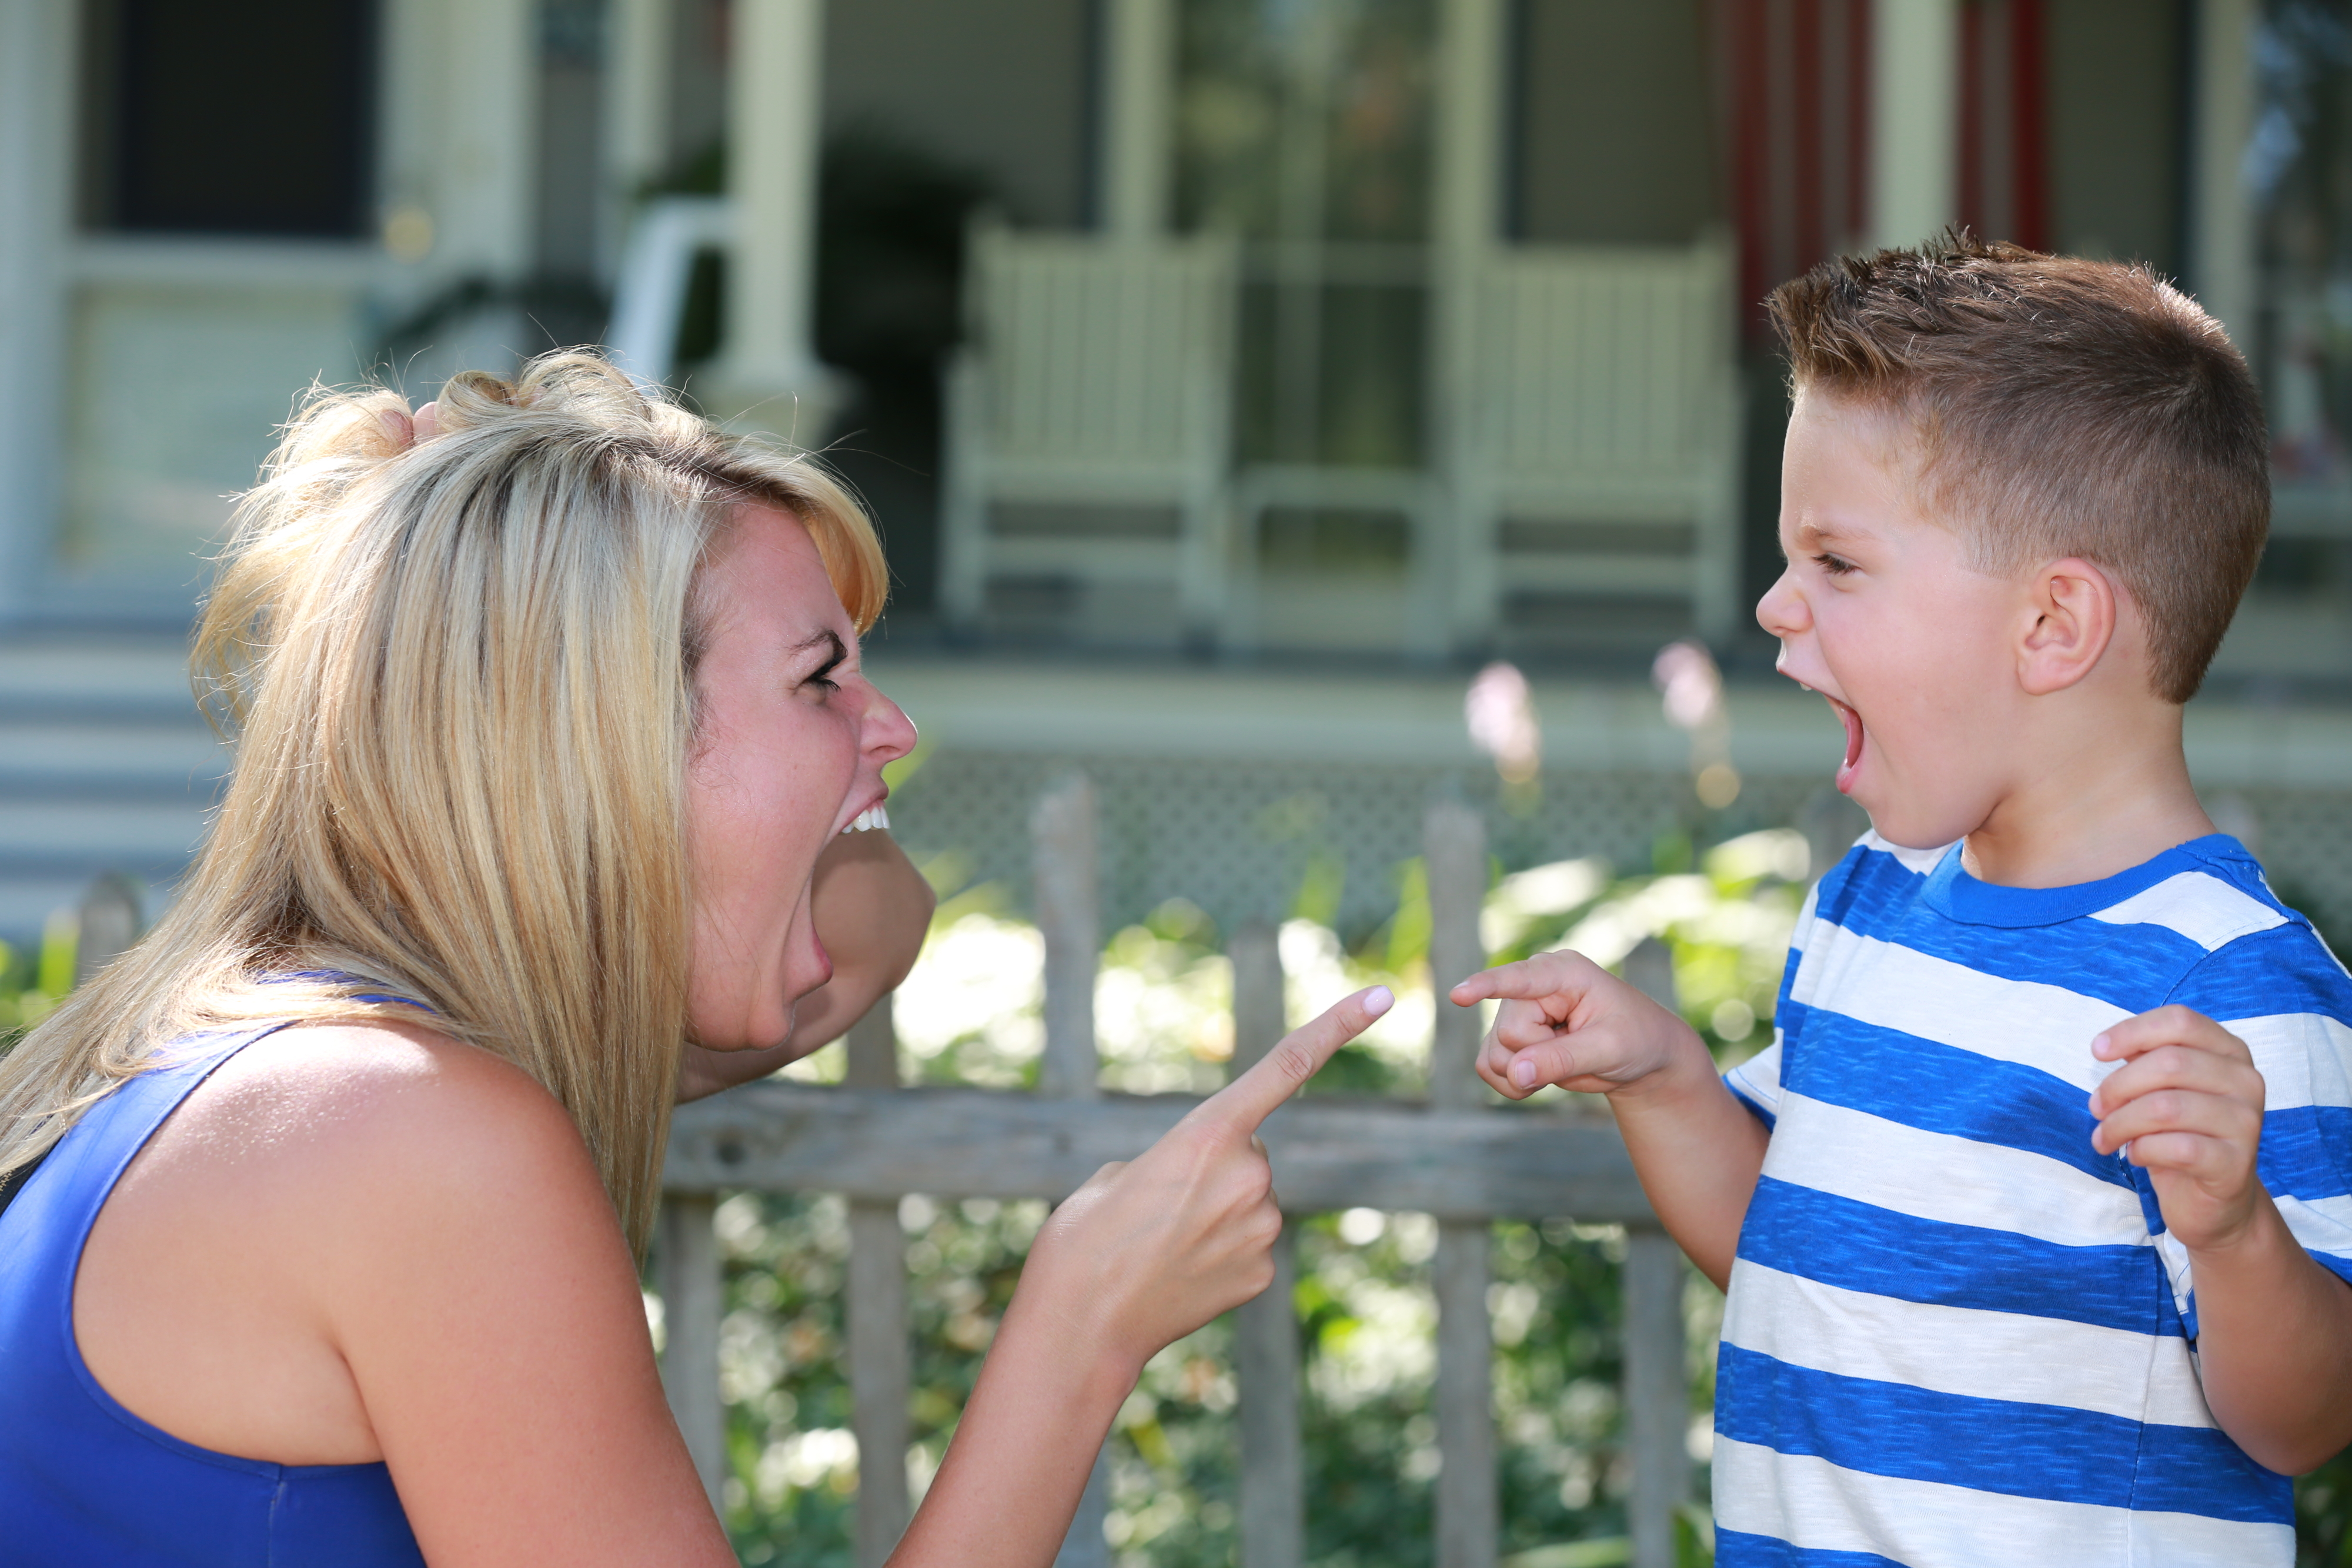 A mother and son yelling and pointing at each other